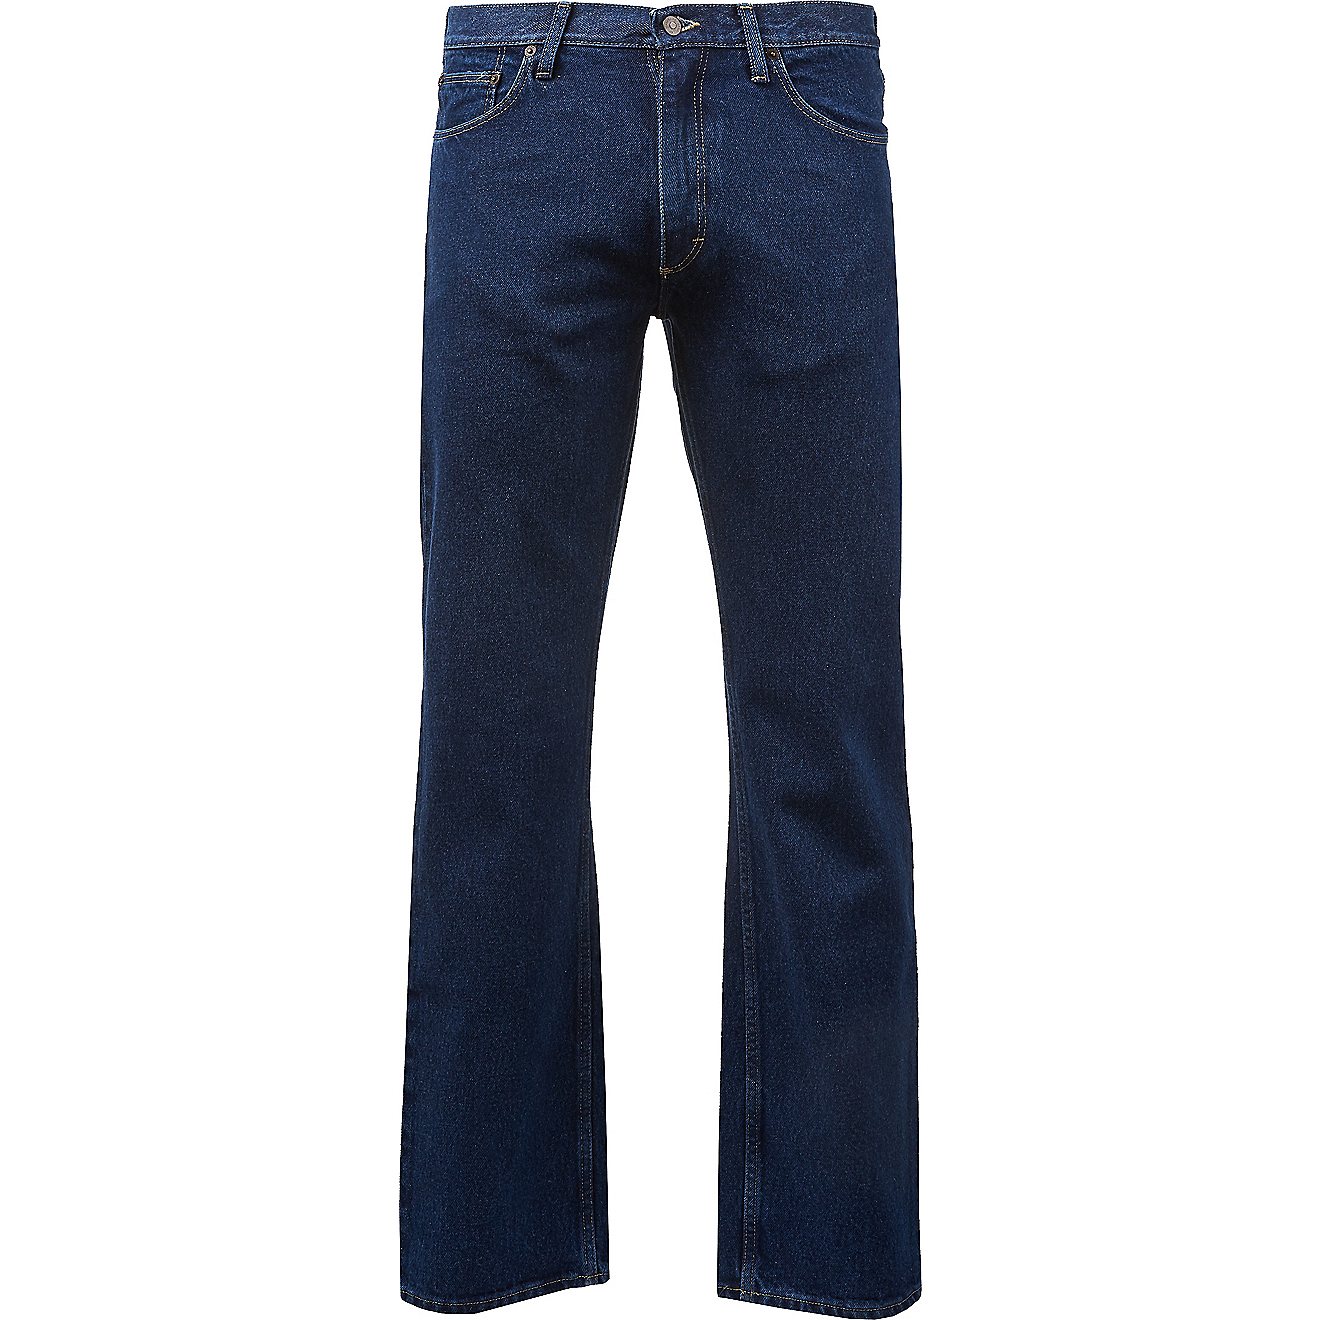 Magellan Outdoors Men's Classic Fit Jeans | Academy